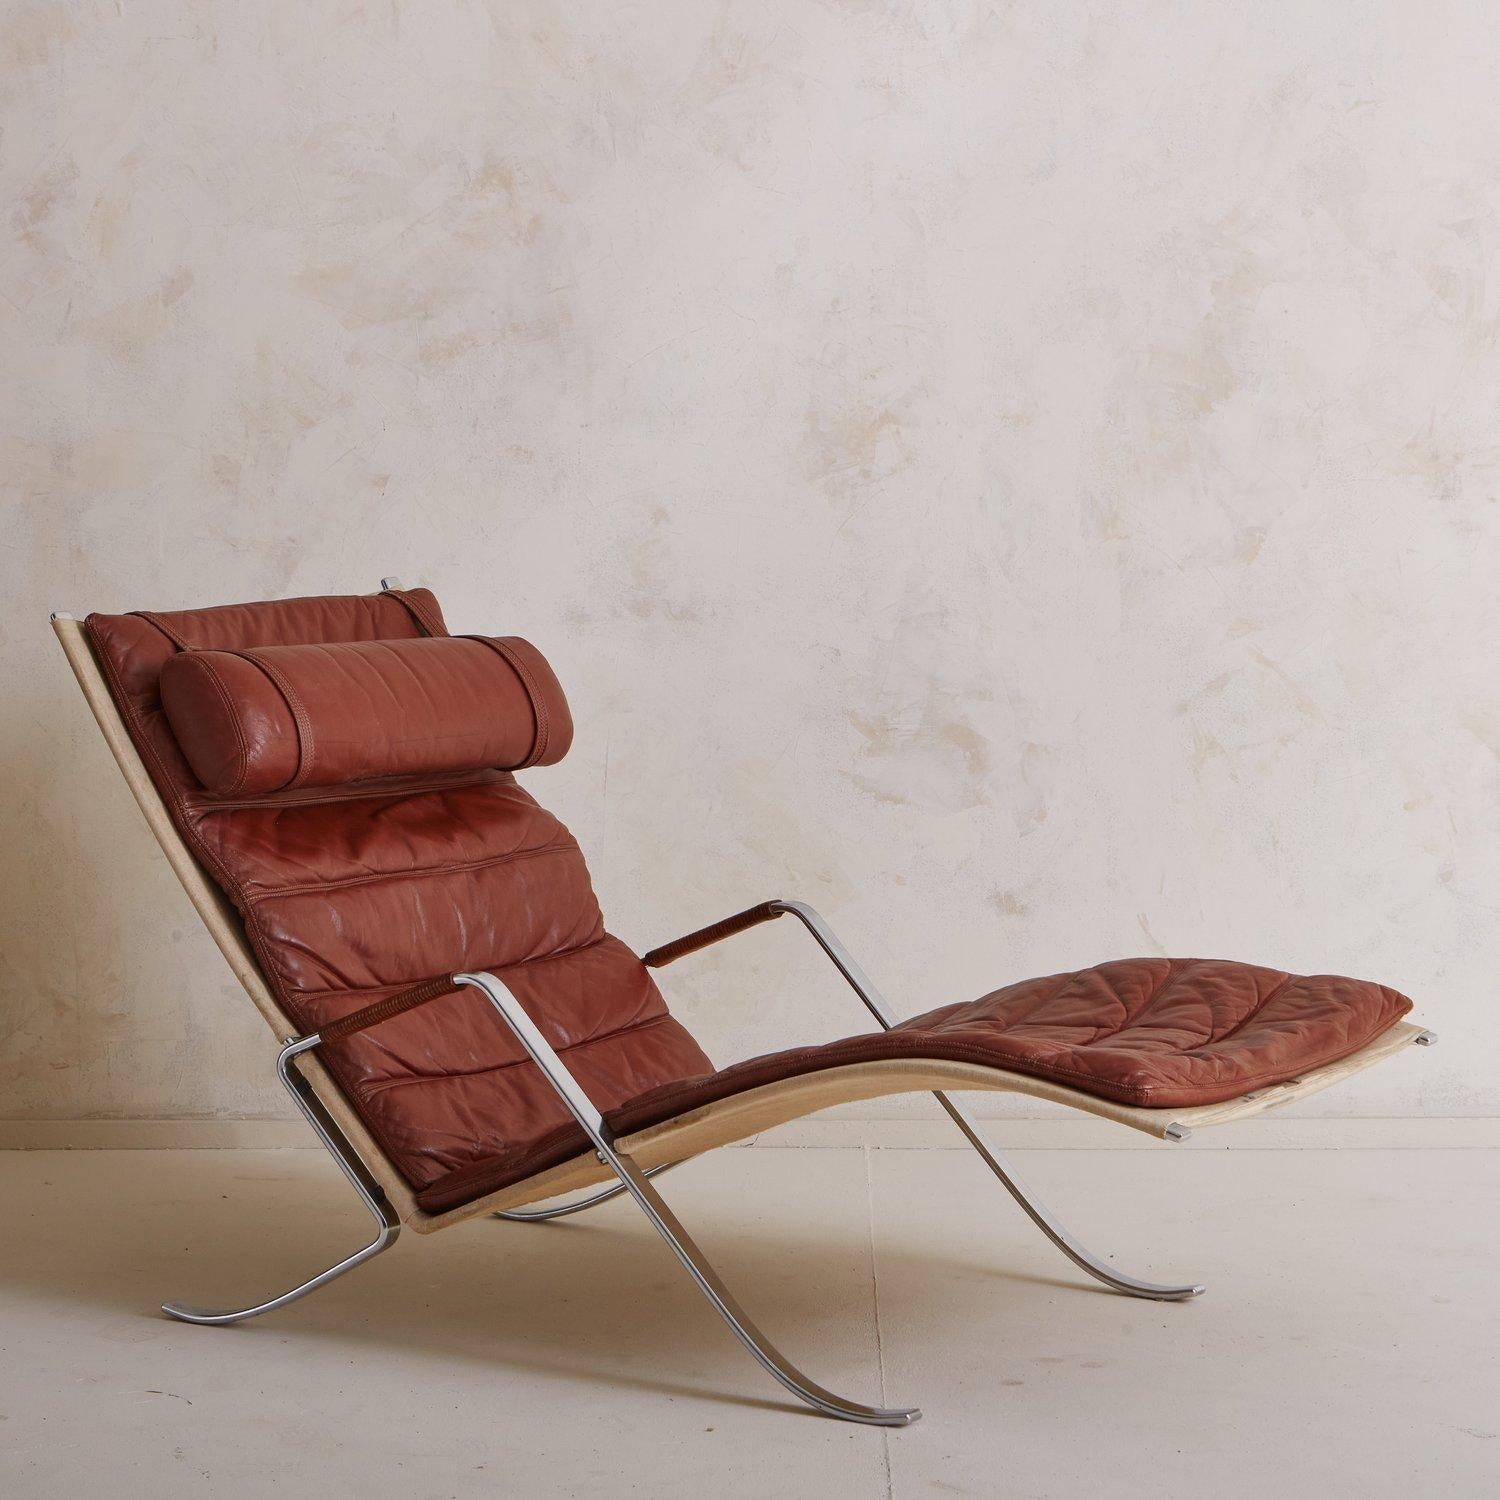 A vintage grasshopper arm chair by Preben Fabricius and Jørgen Kastholm for Kill International. This sculptural lounge features a beautiful patinated leather cushion with channeled details and a detachable headrest. It has a polished chrome plated